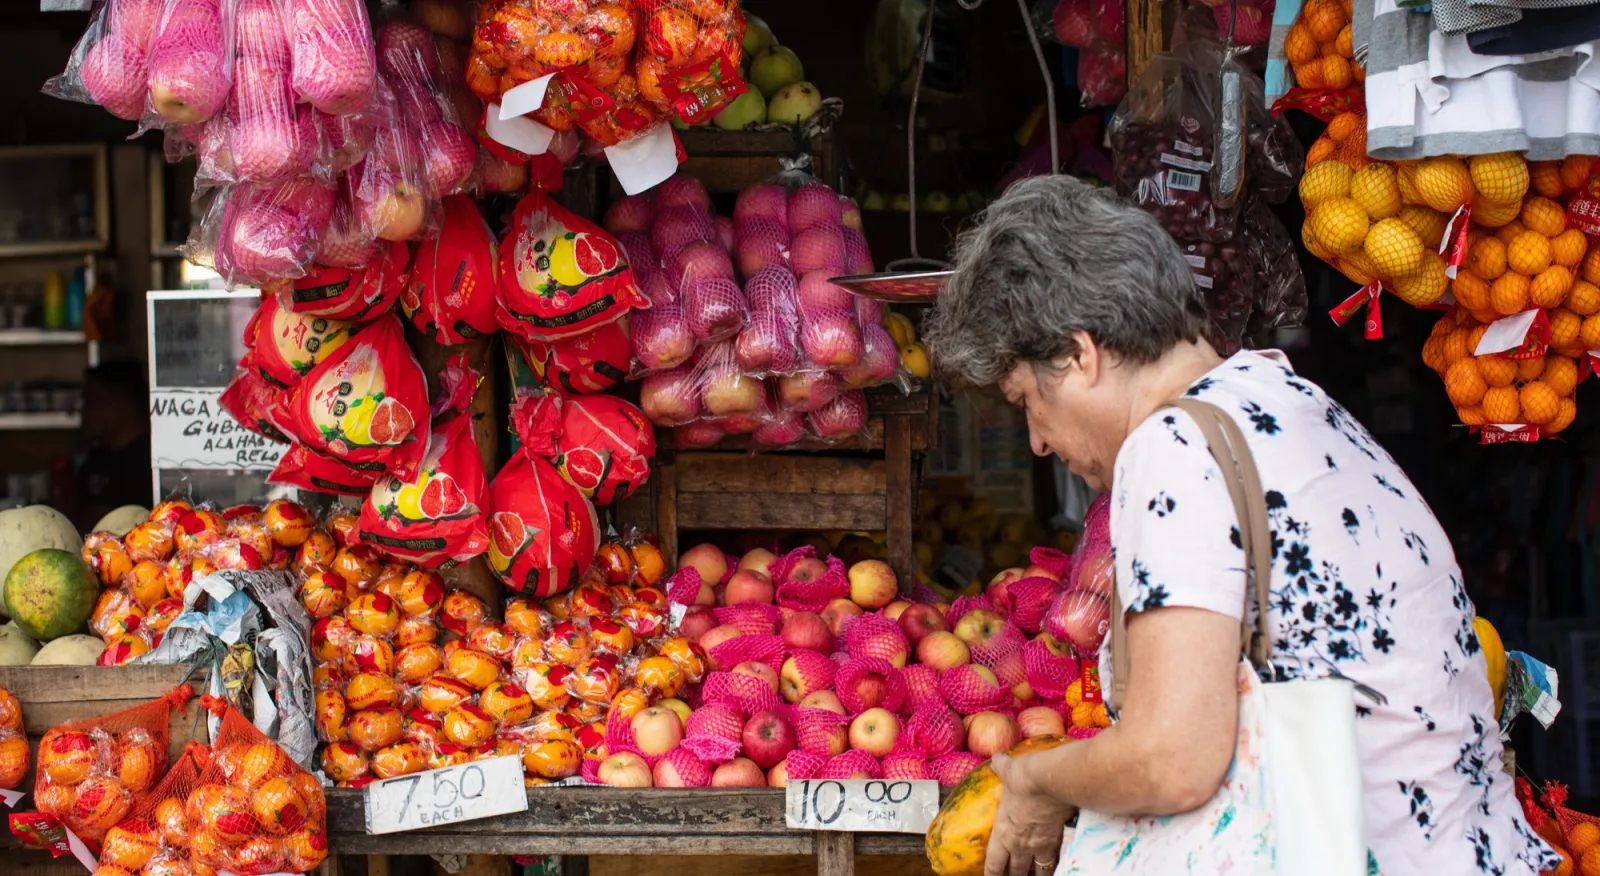 A woman stands in front of a full market stall, her back is to the camera and she inspects the fruit on the shelves.